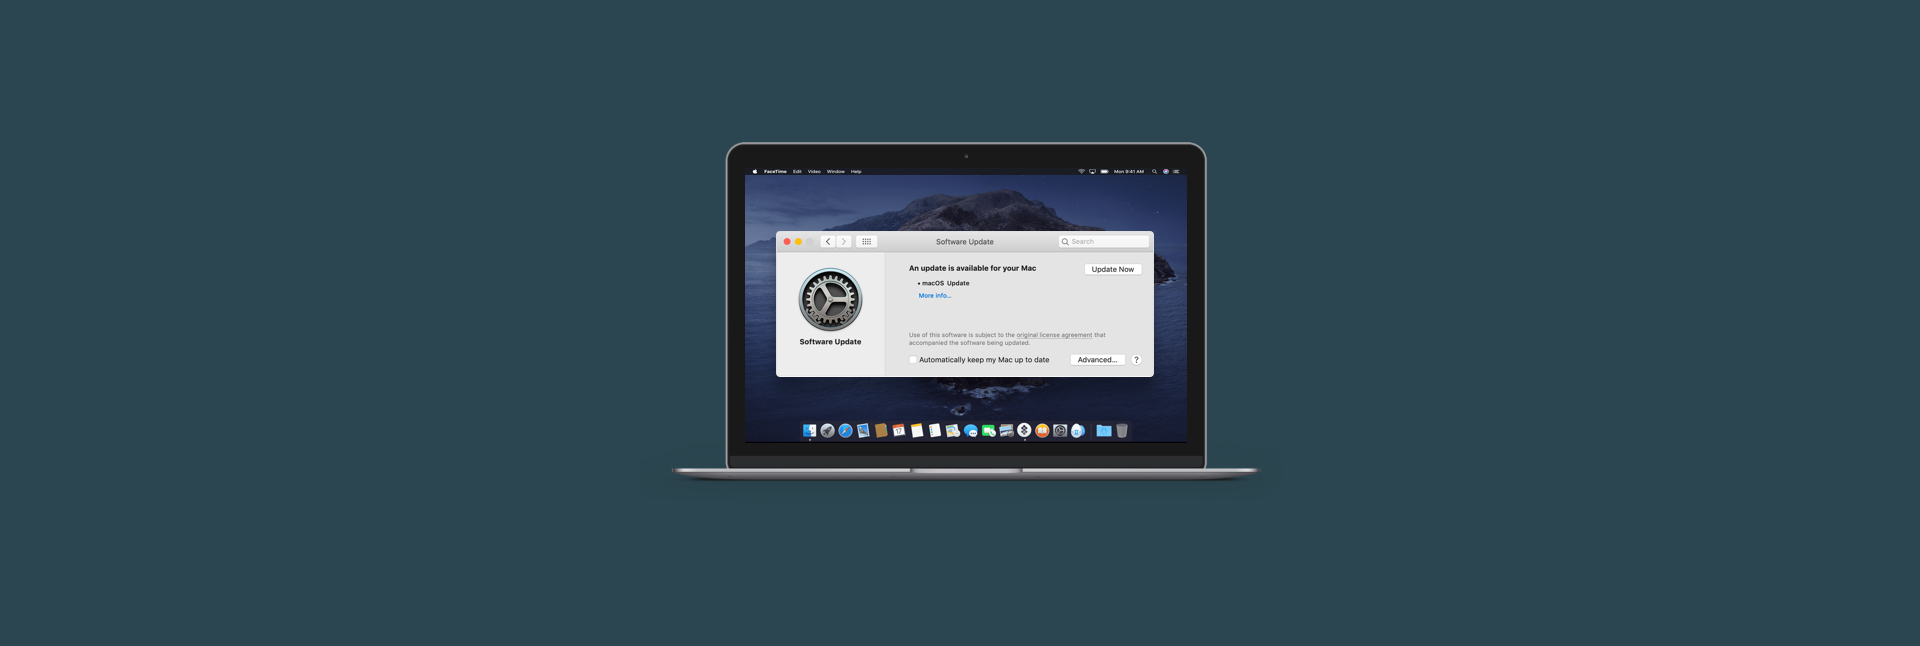 how to upgrade mac operating system 10.8 to 10.12